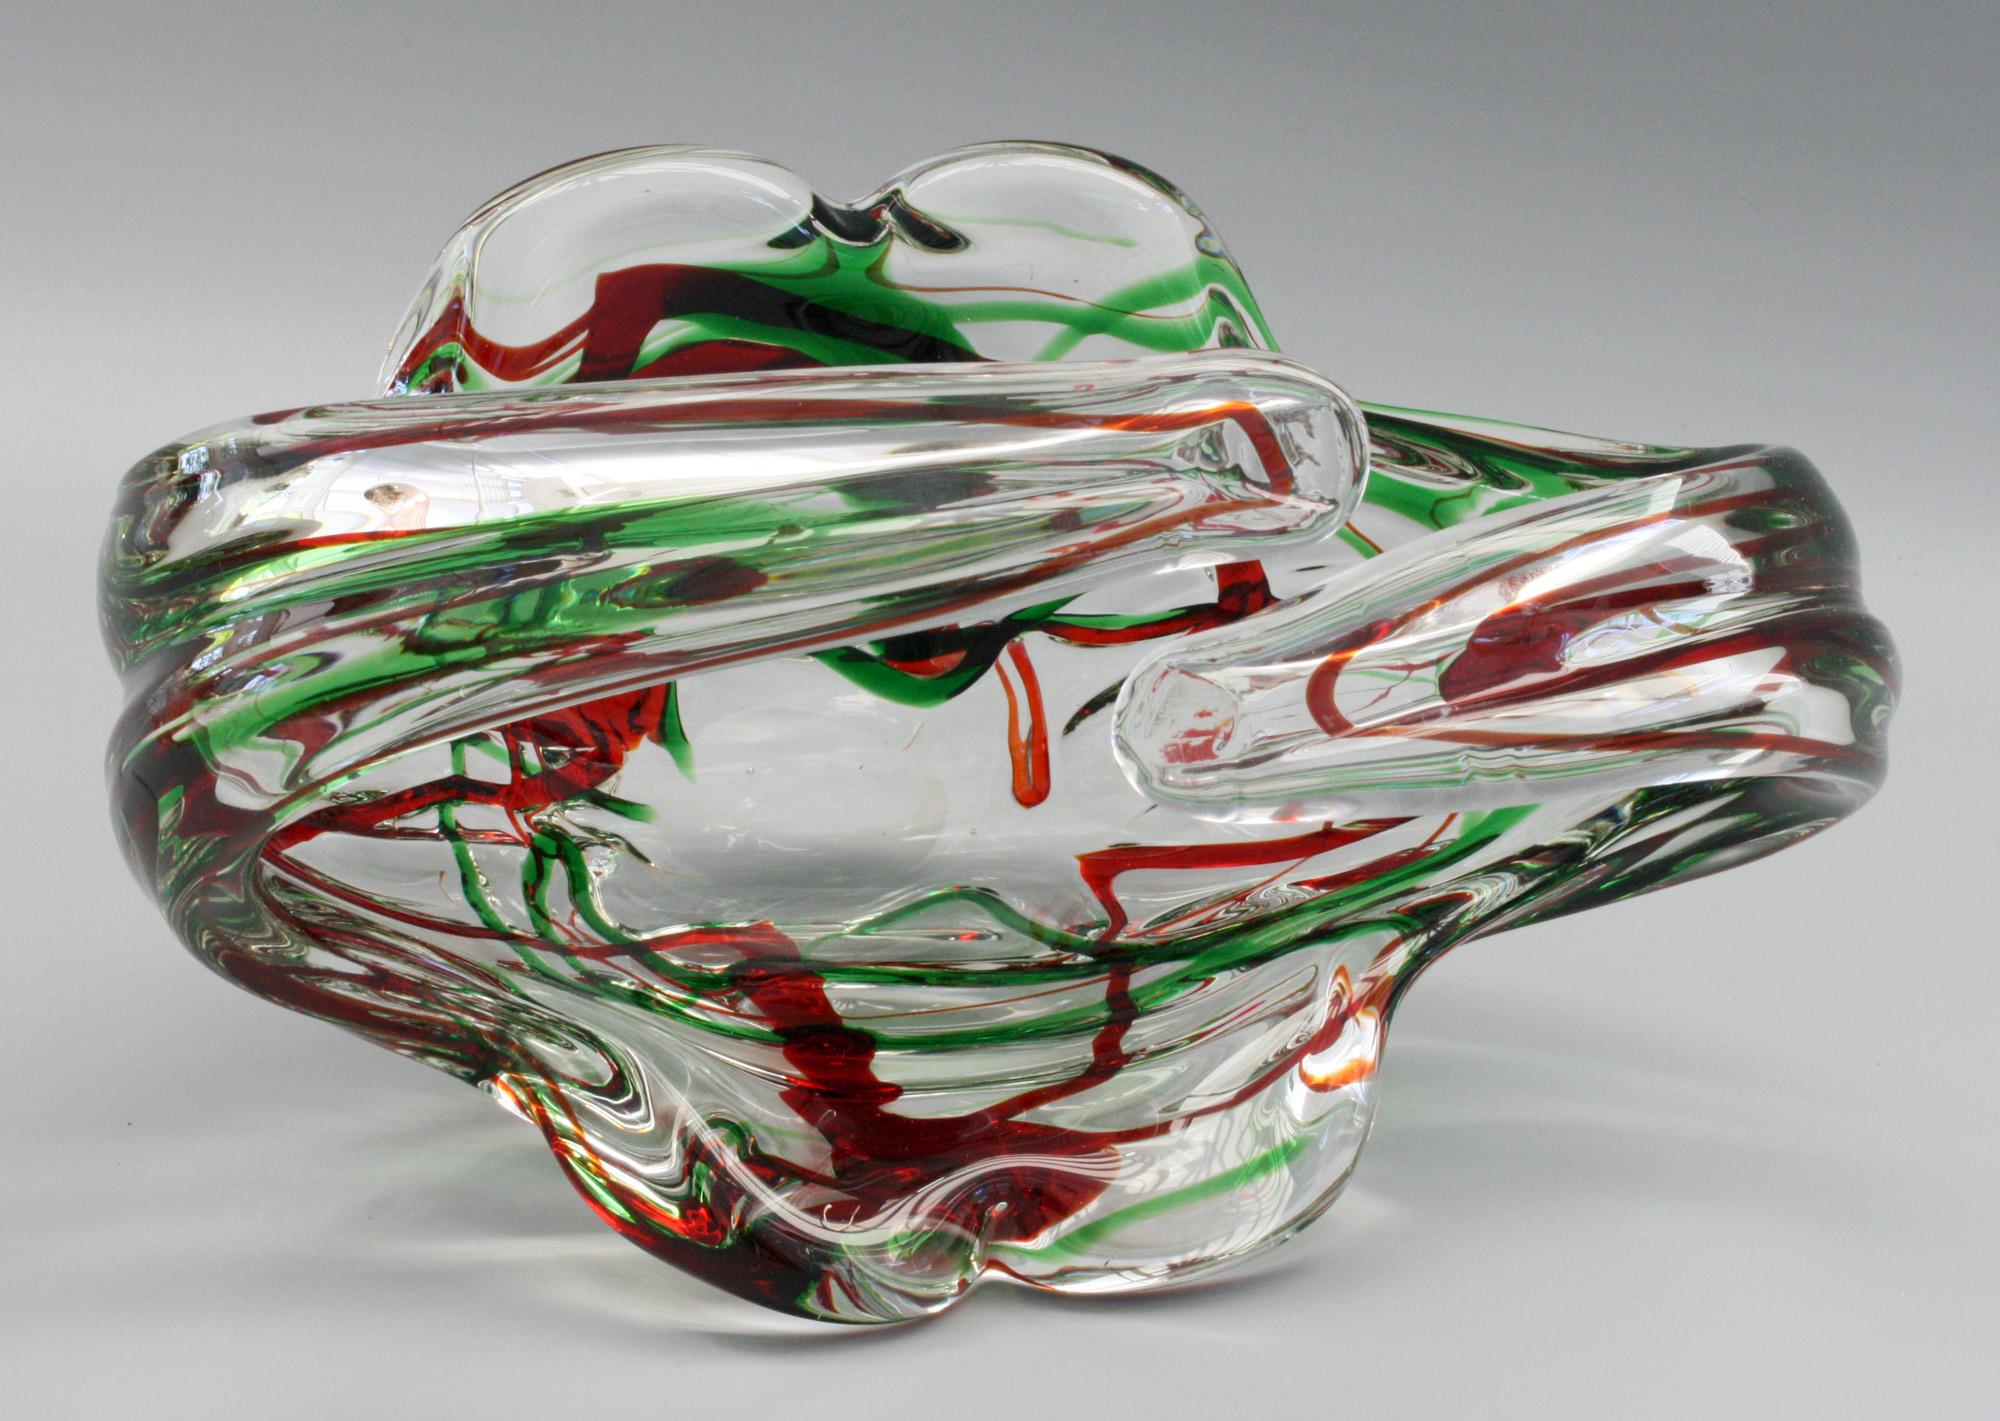 Murano Italian Midcentury Art Glass Bowl with Red and Green Trailed Designs In Good Condition For Sale In Bishop's Stortford, Hertfordshire